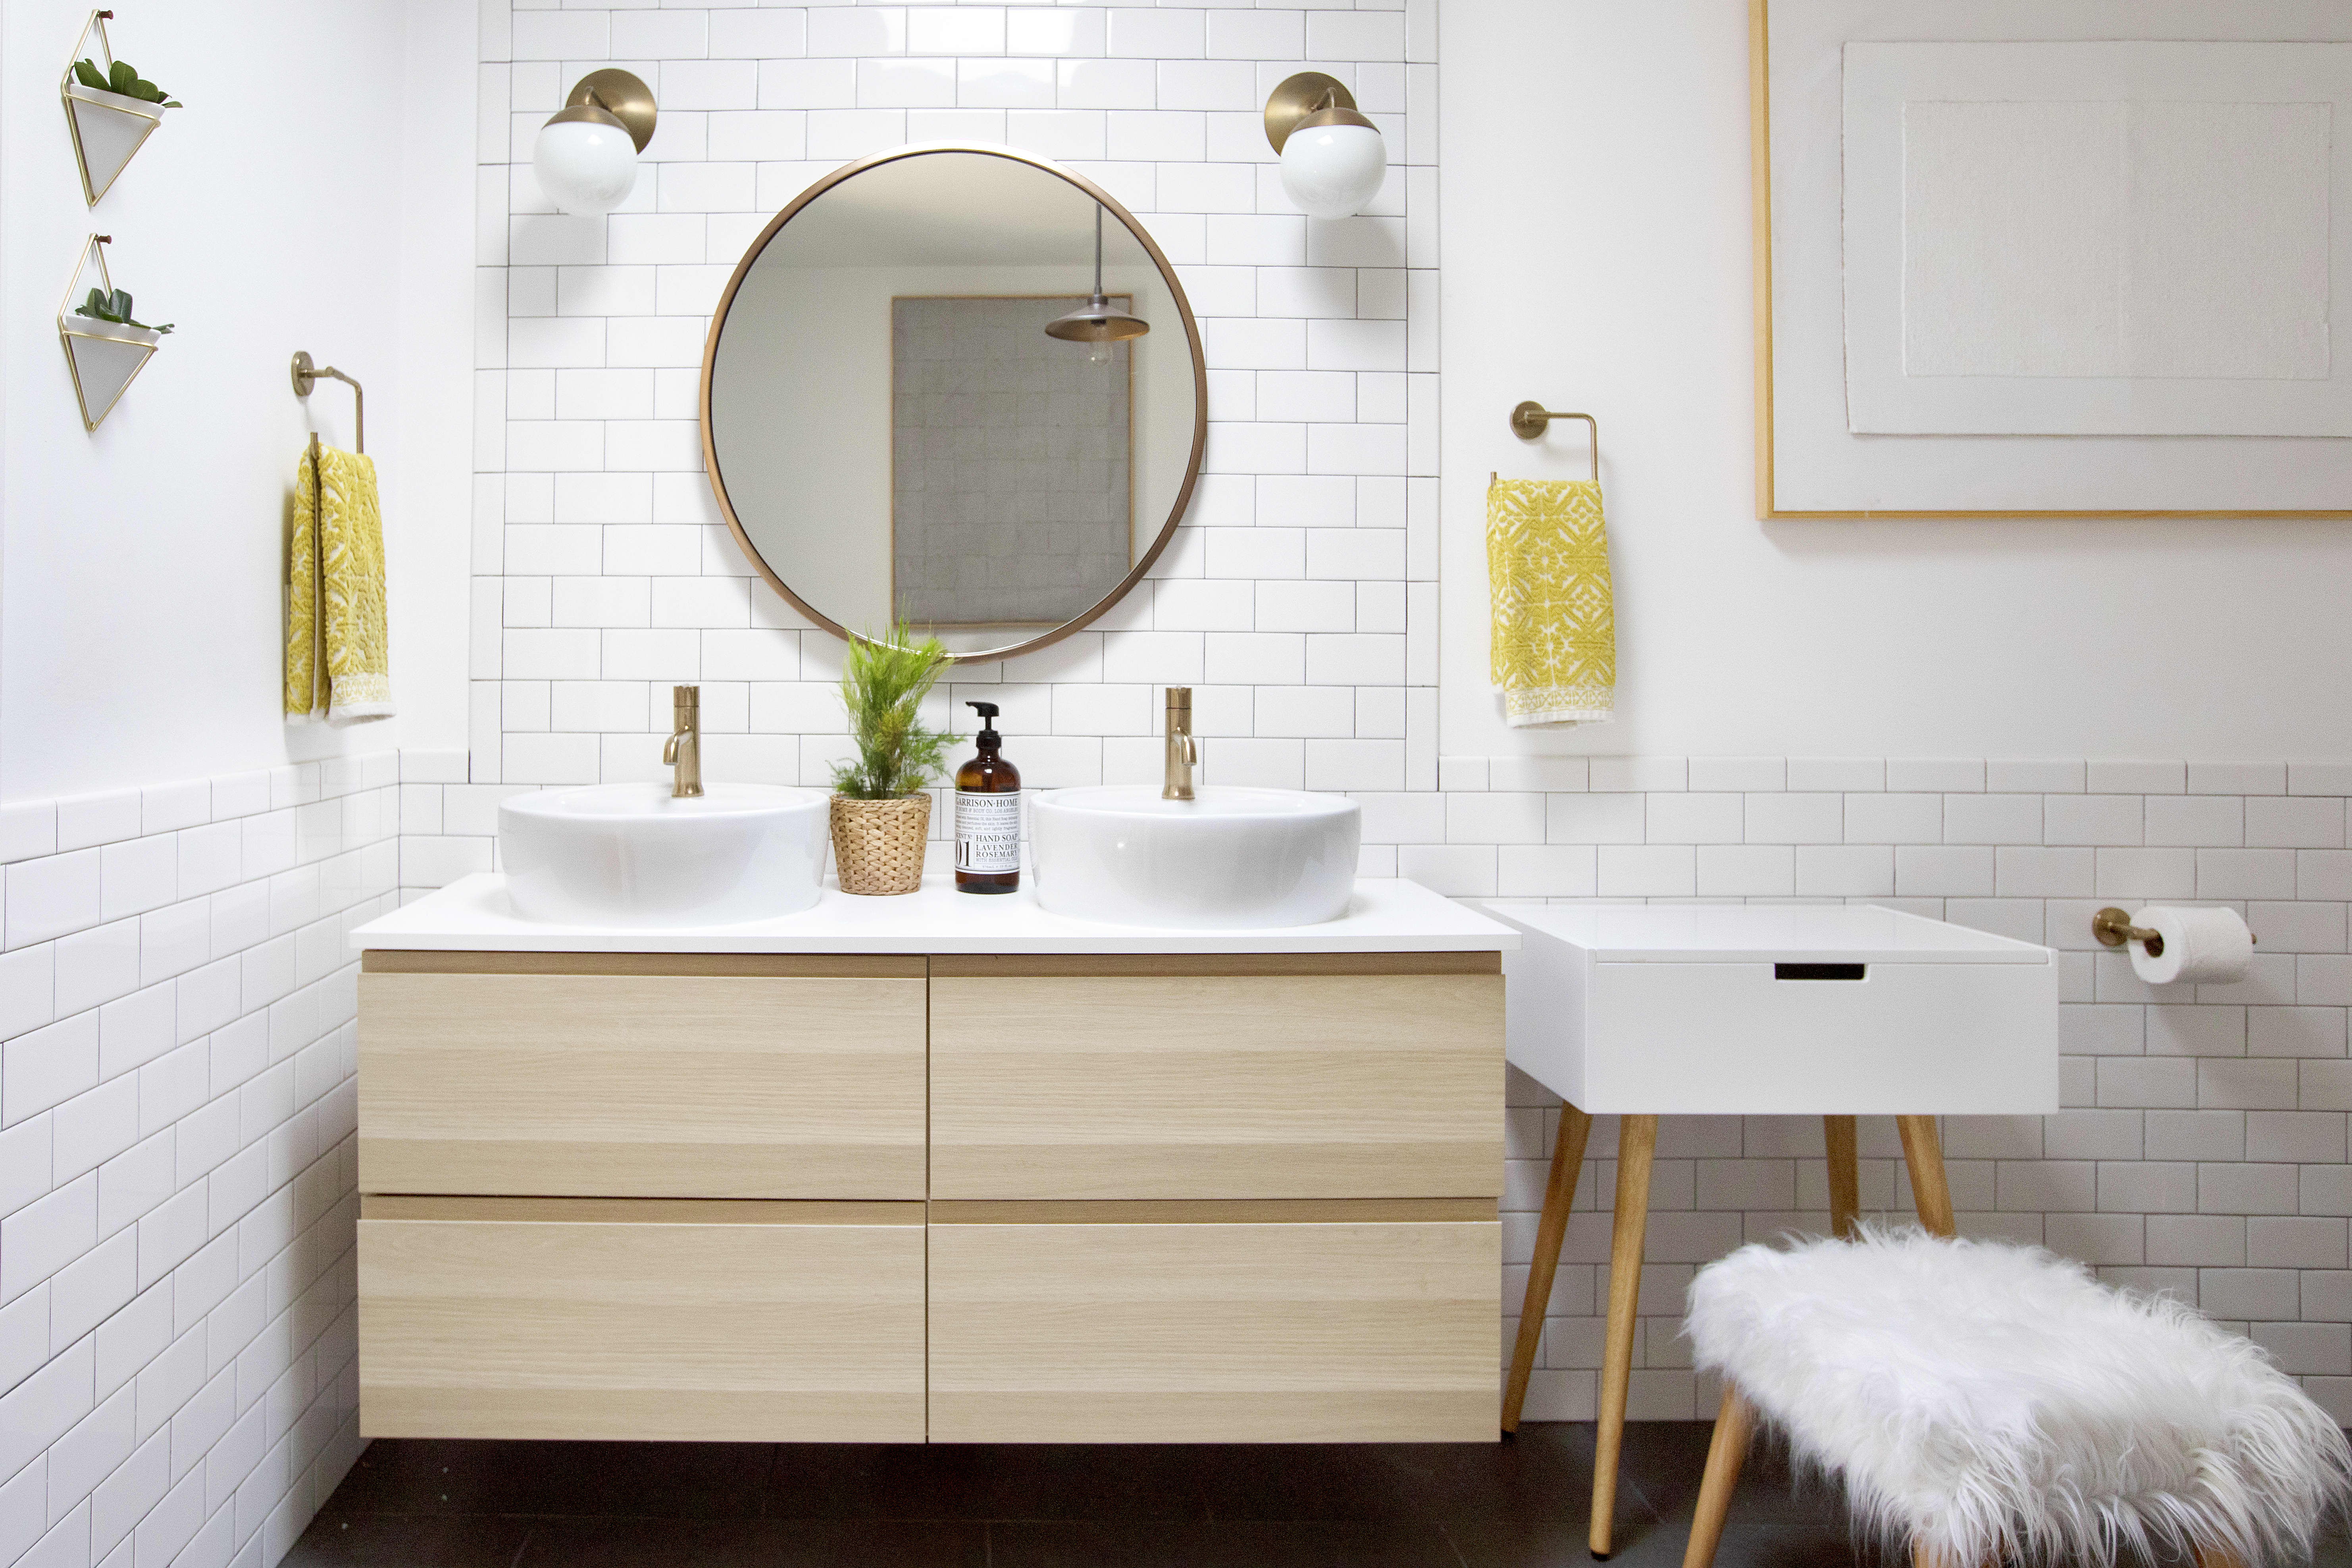 Bathroom Remodel Cost How To Budget A Renovation